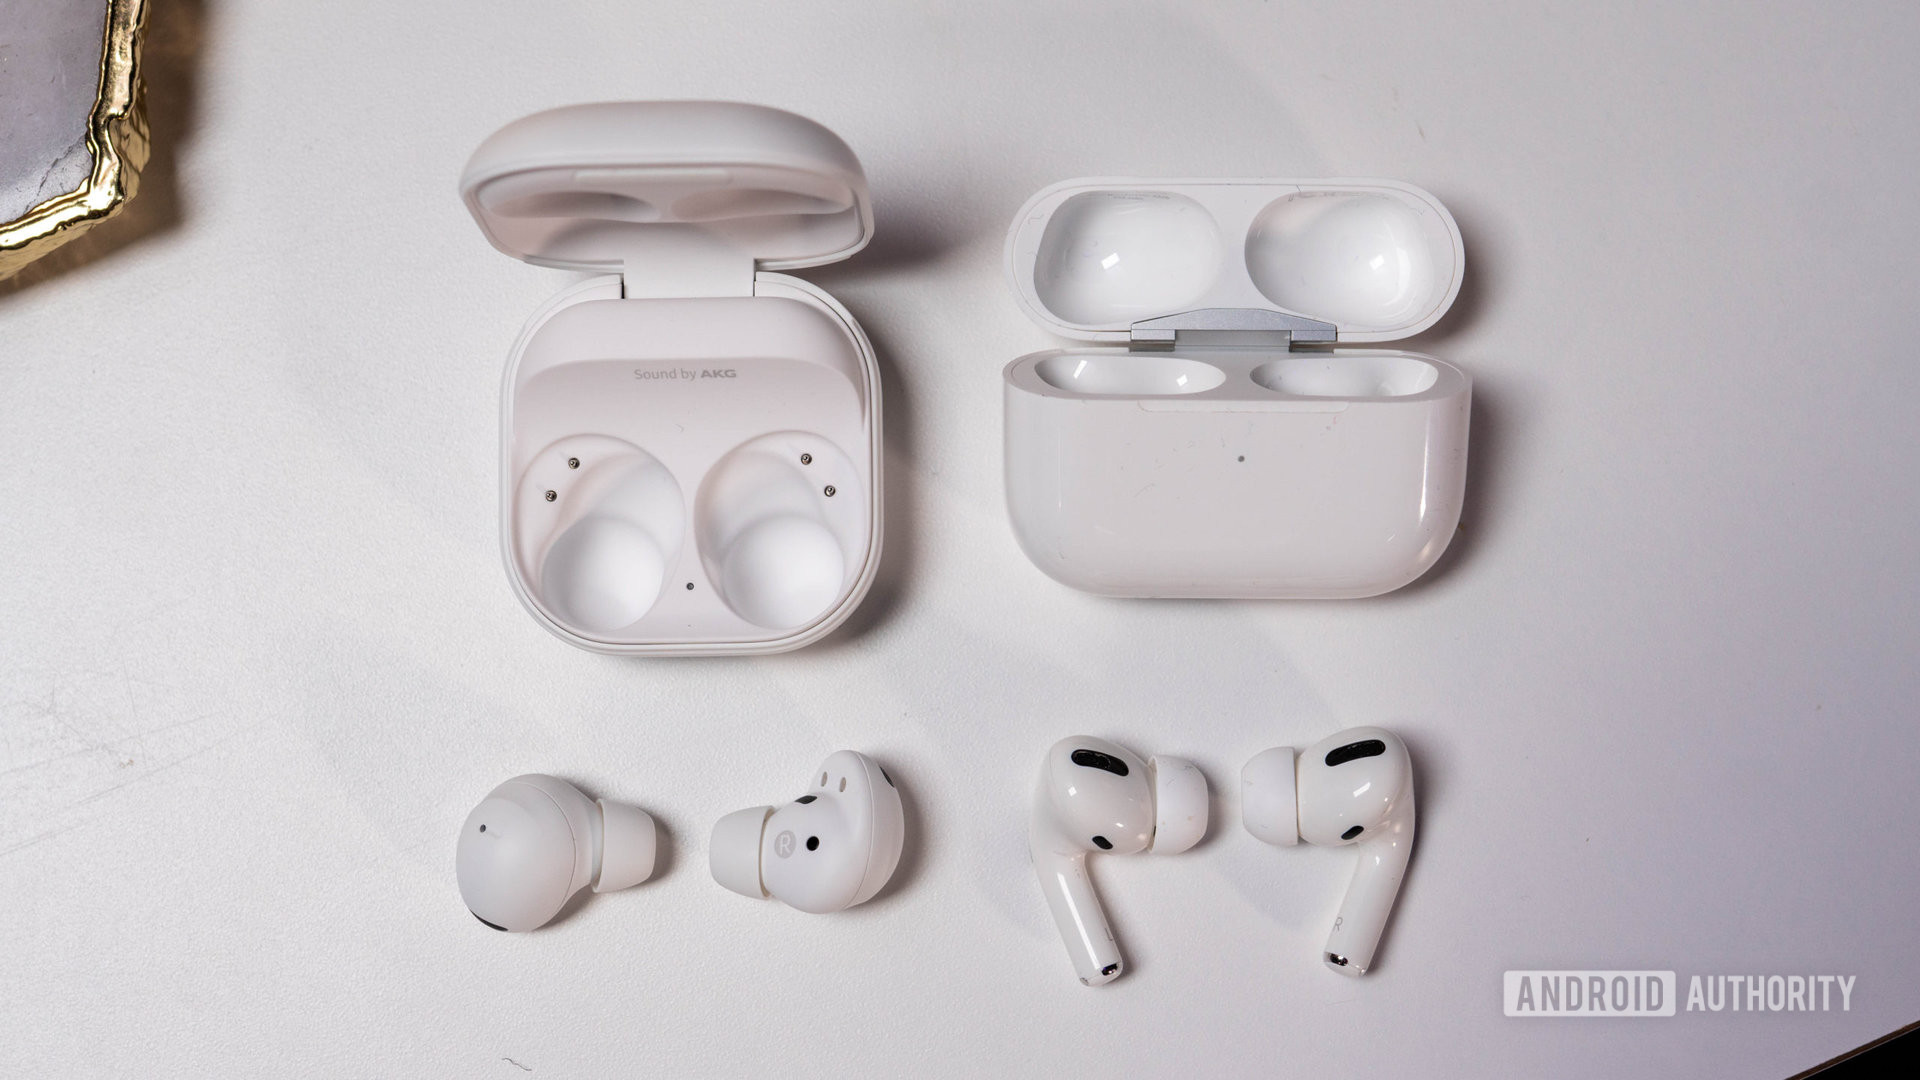 Galaxy Buds 2 Pro Apple AirPods Pro: Which should you buy?